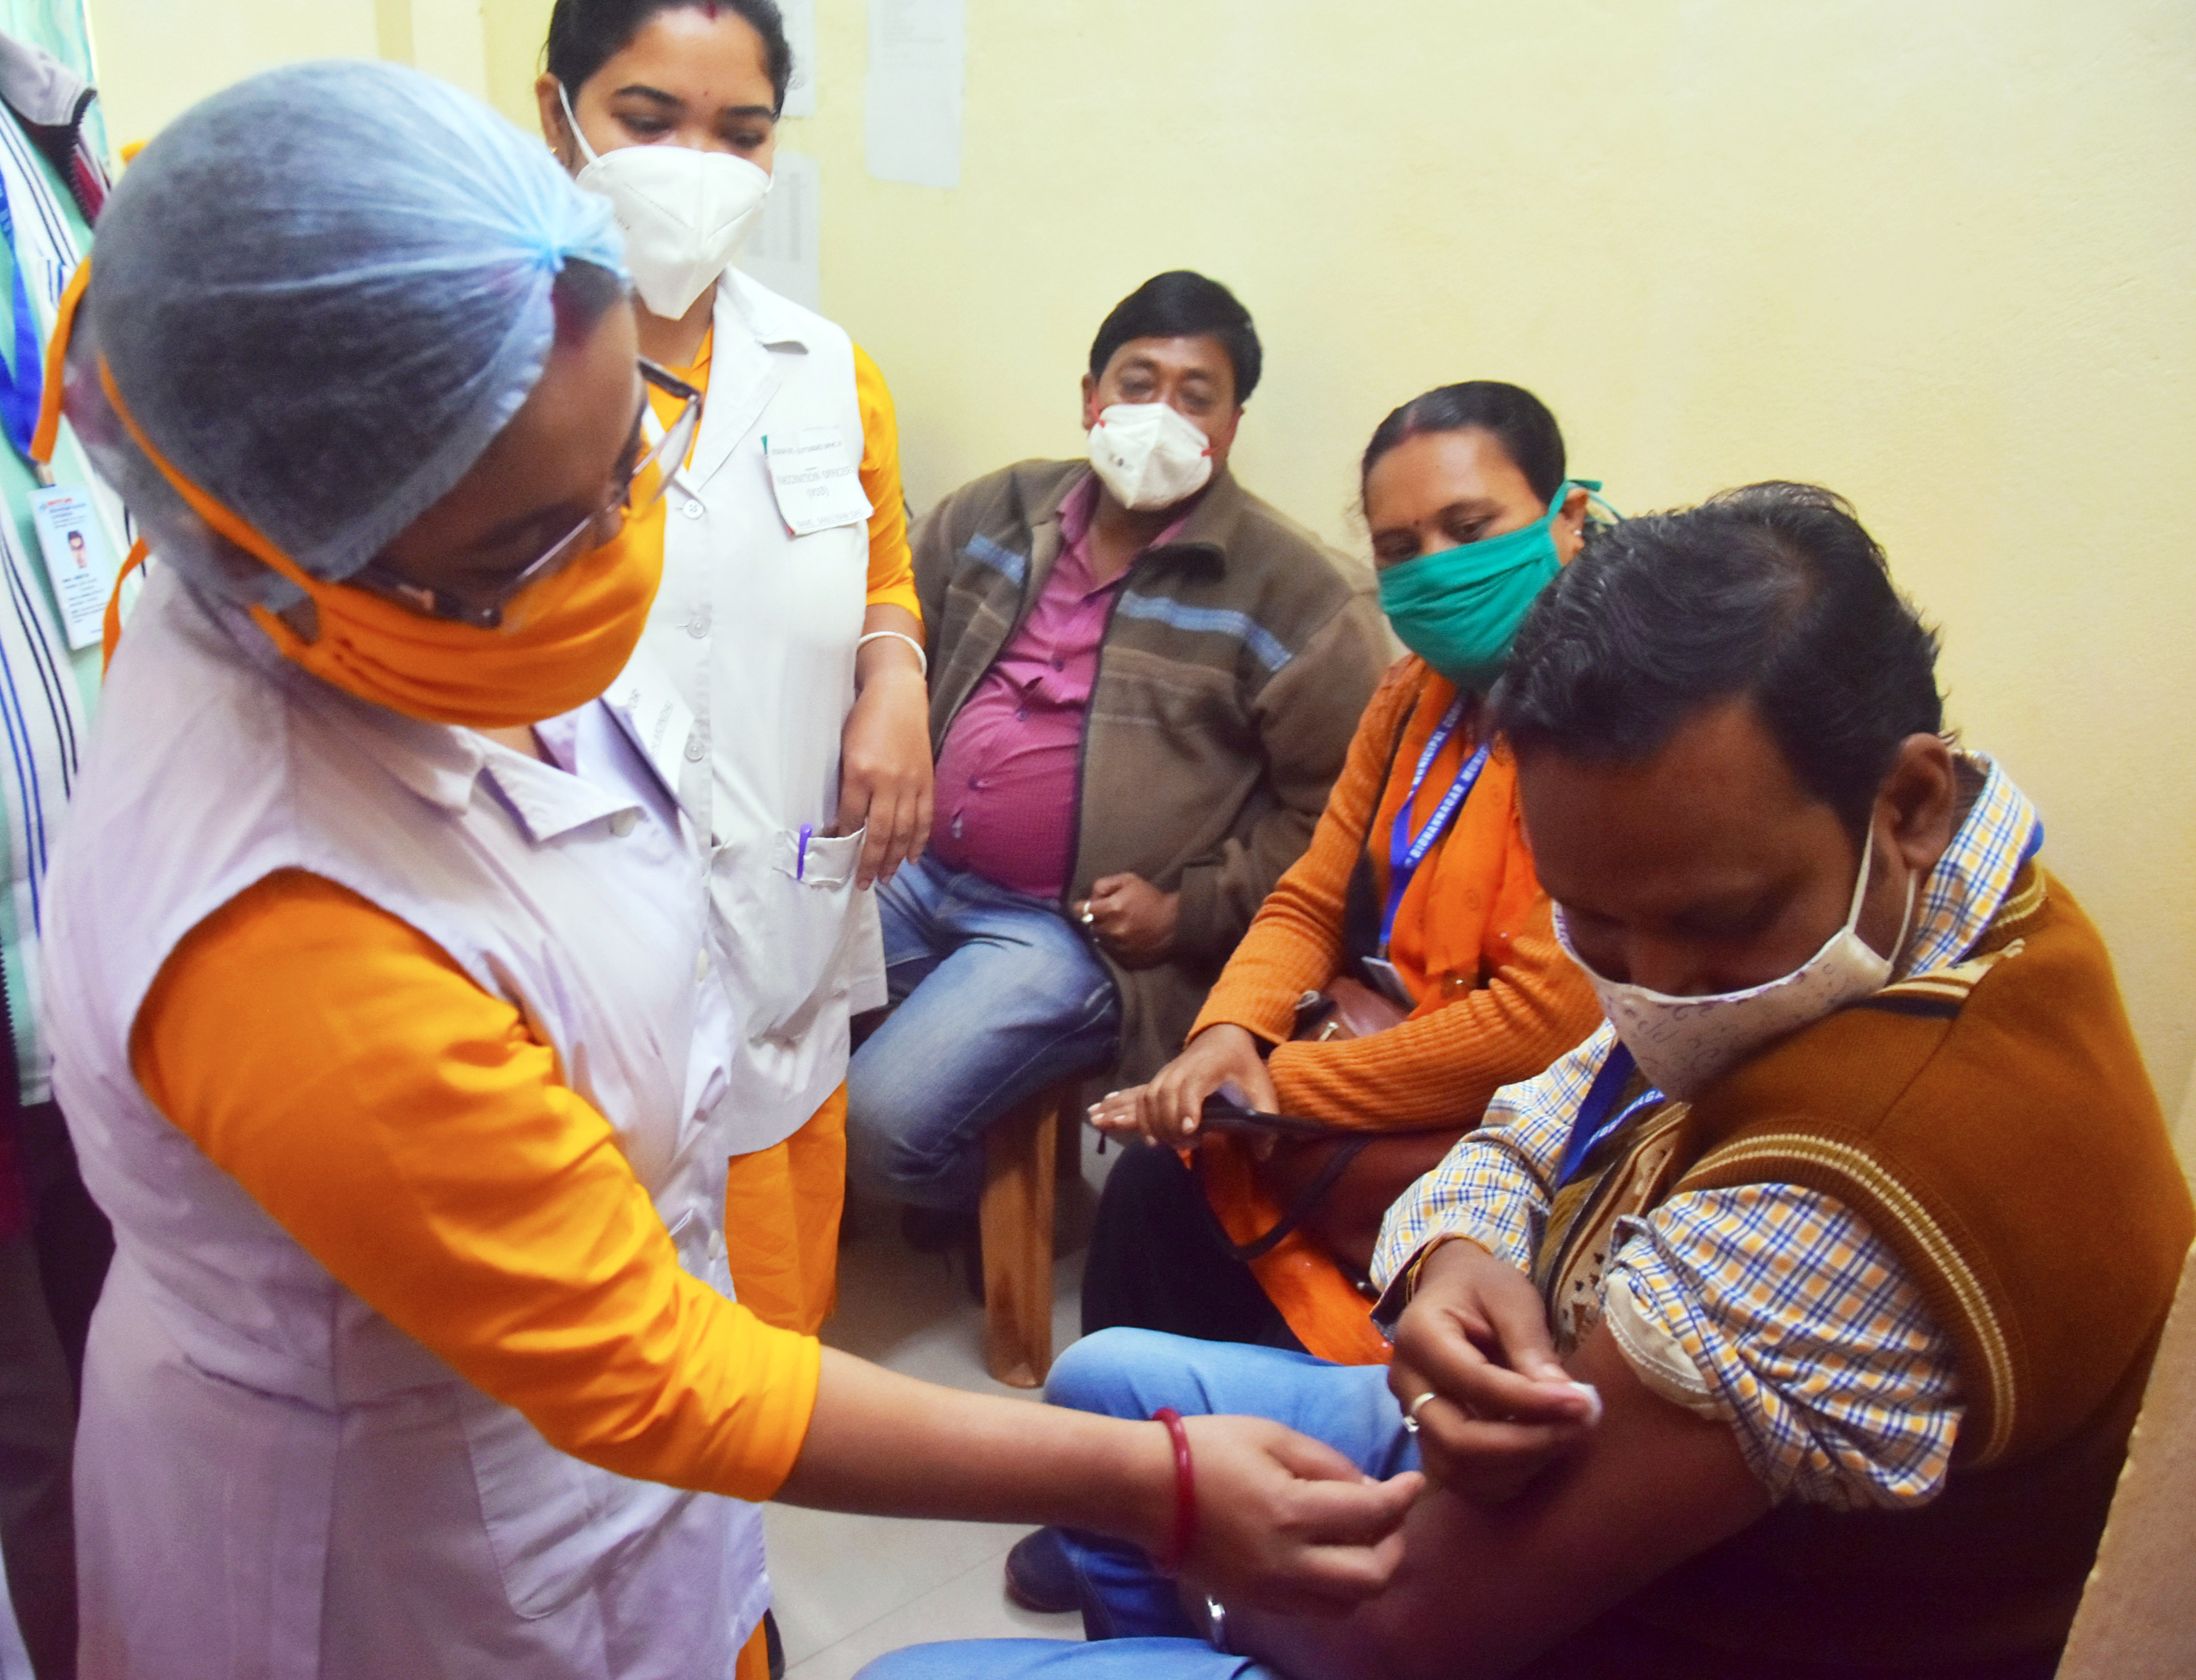 Covid-19: Over 54 lakh frontline workers vaccinated, 20 crore tests completed till date